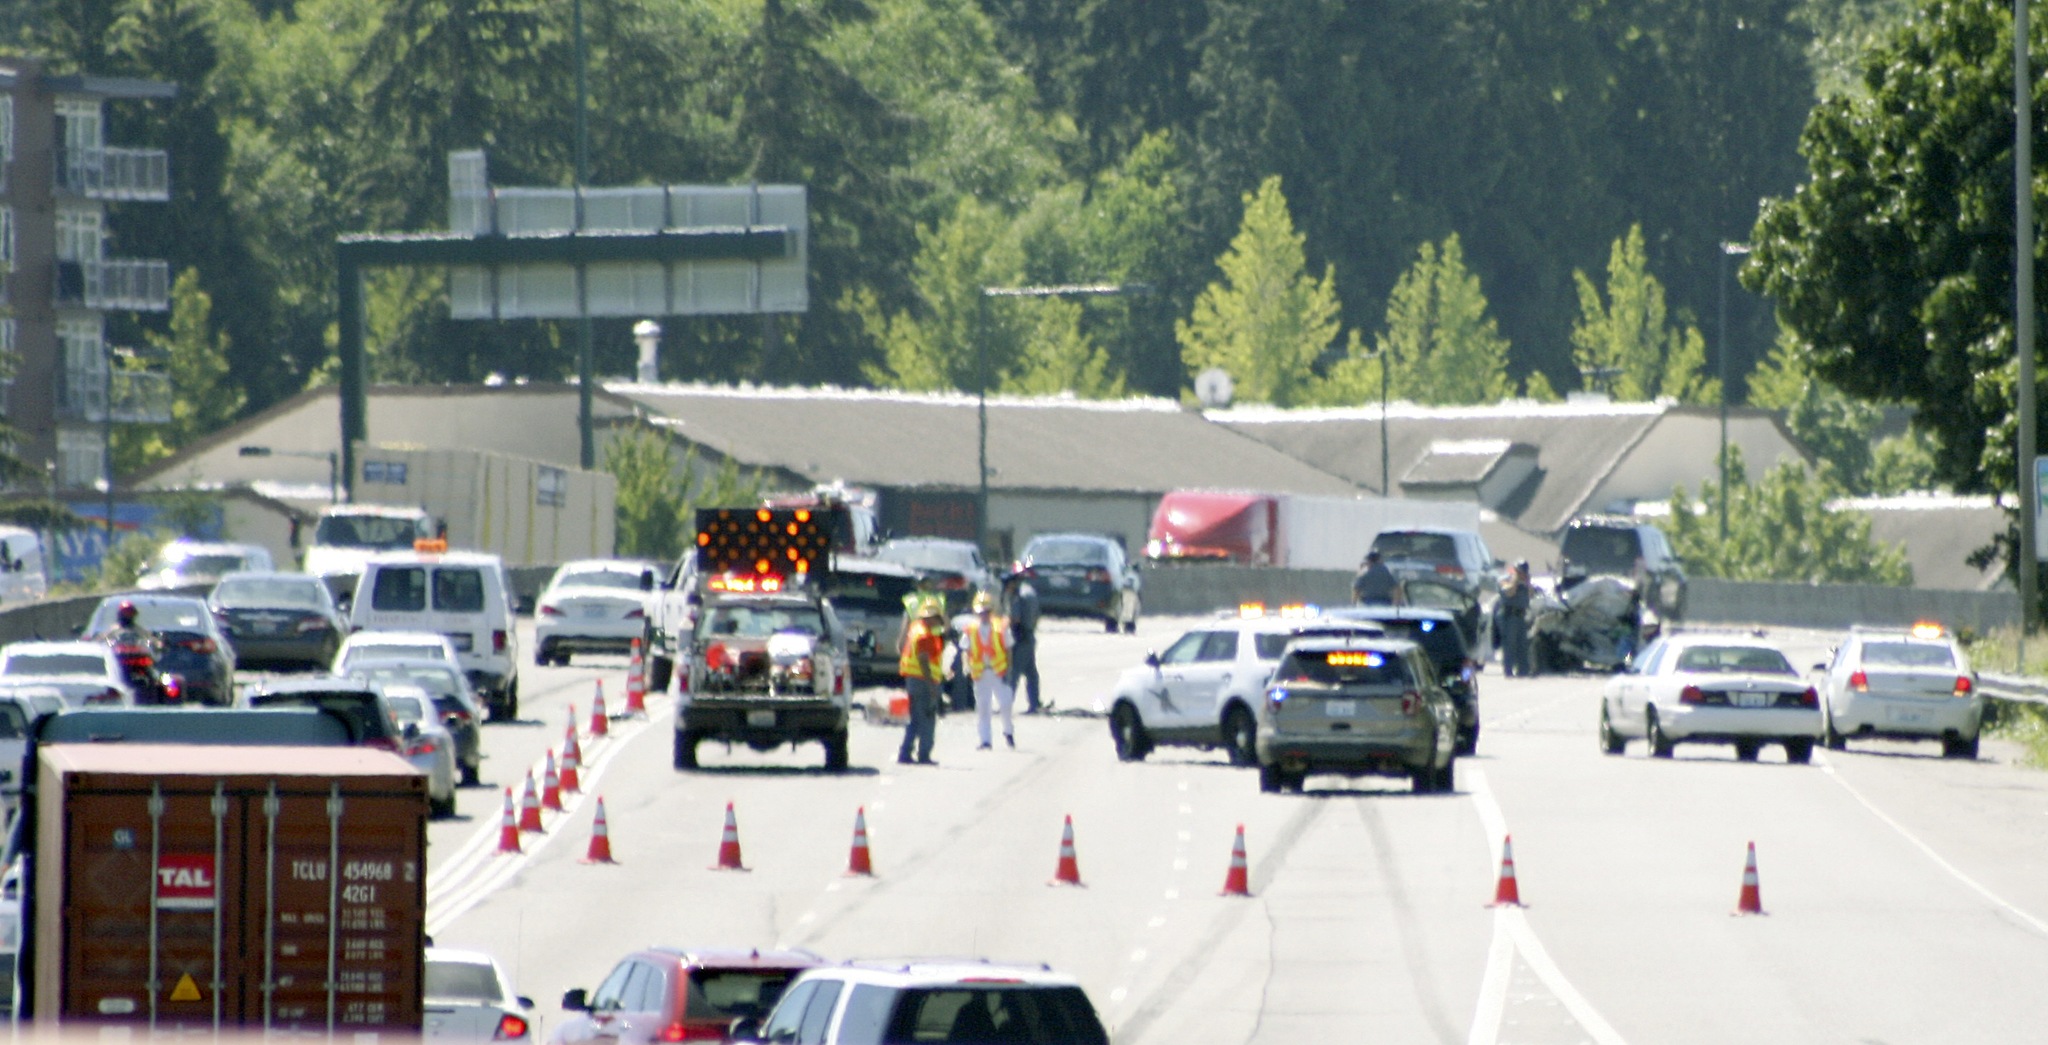 A major injury accident blocked southbond I-405 in Kirkland for two hours on Monday morning. AARON KUNKLER/Kirkland Reporter